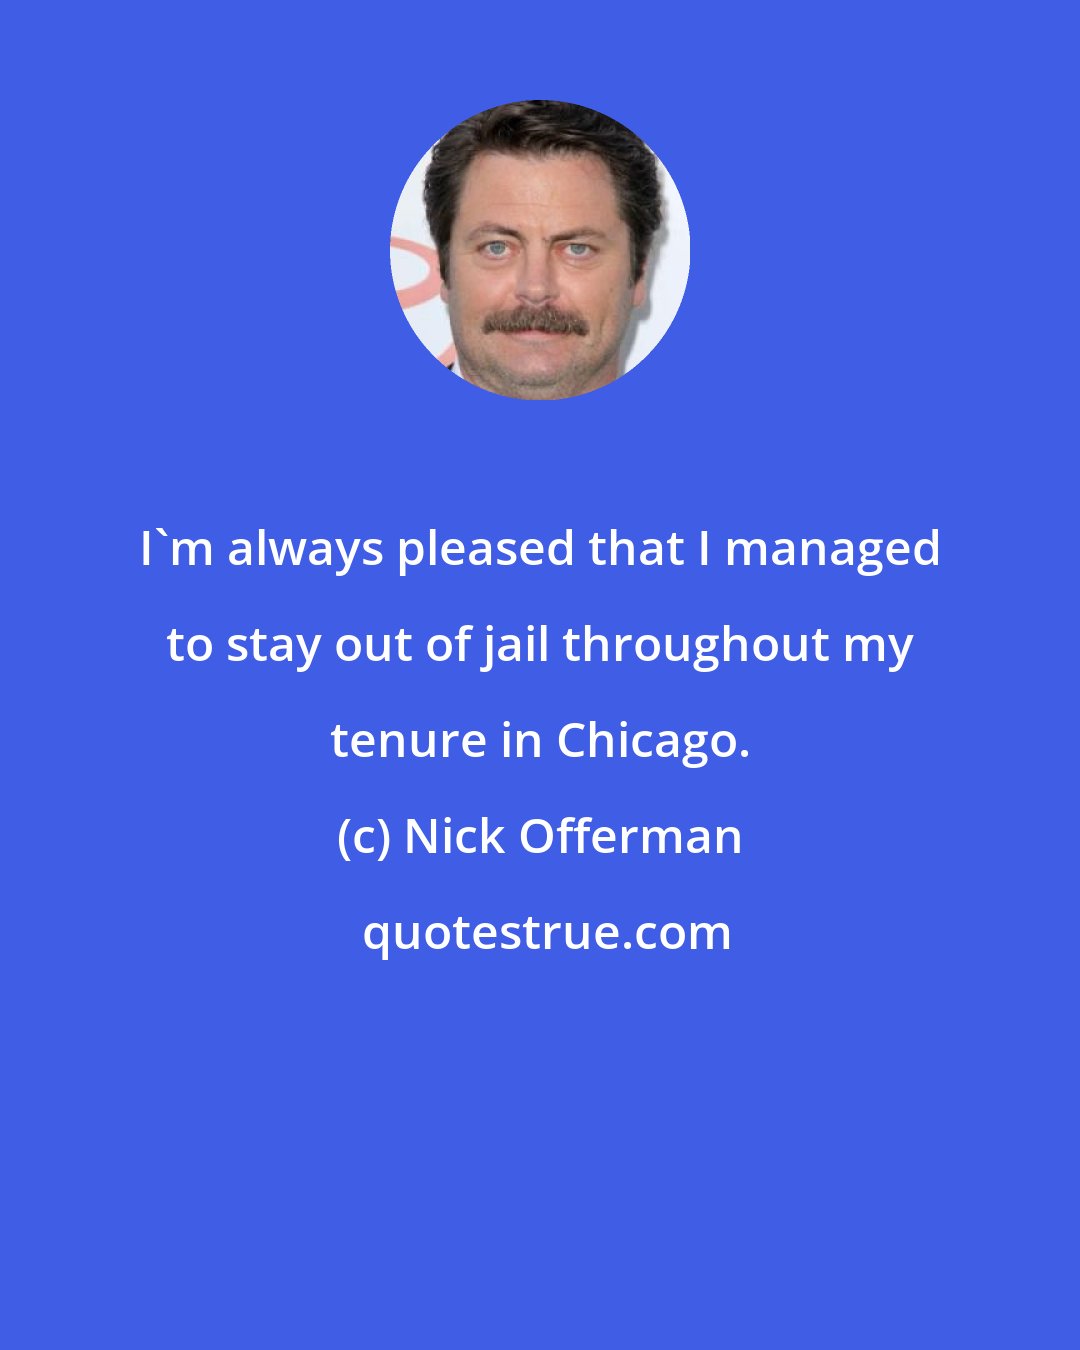 Nick Offerman: I'm always pleased that I managed to stay out of jail throughout my tenure in Chicago.